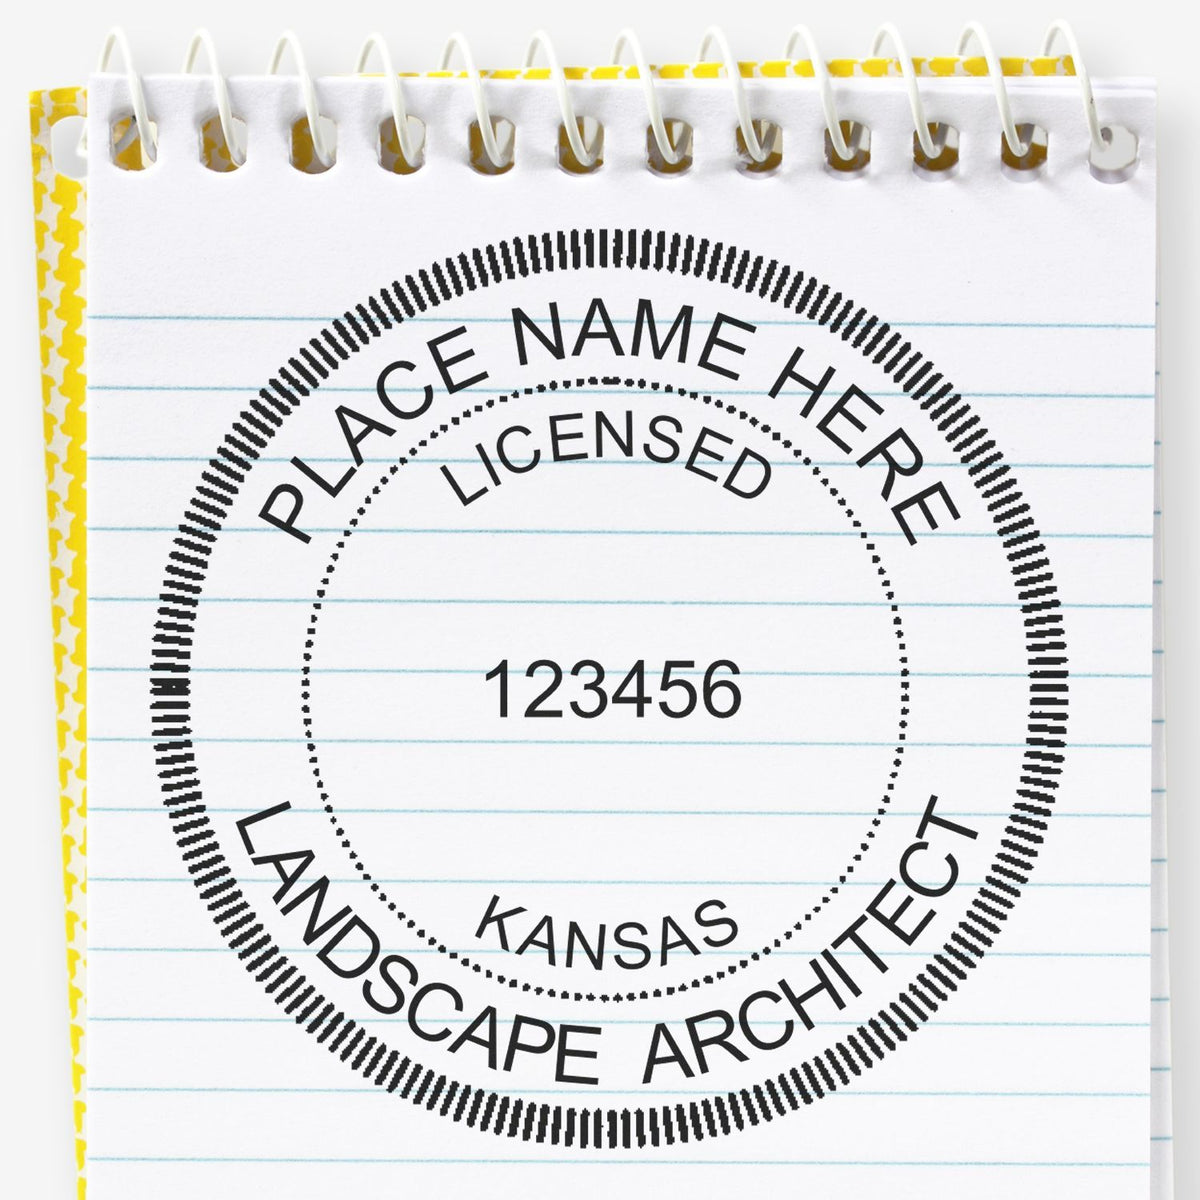 A photograph of the Self-Inking Kansas Landscape Architect Stamp stamp impression reveals a vivid, professional image of the on paper.